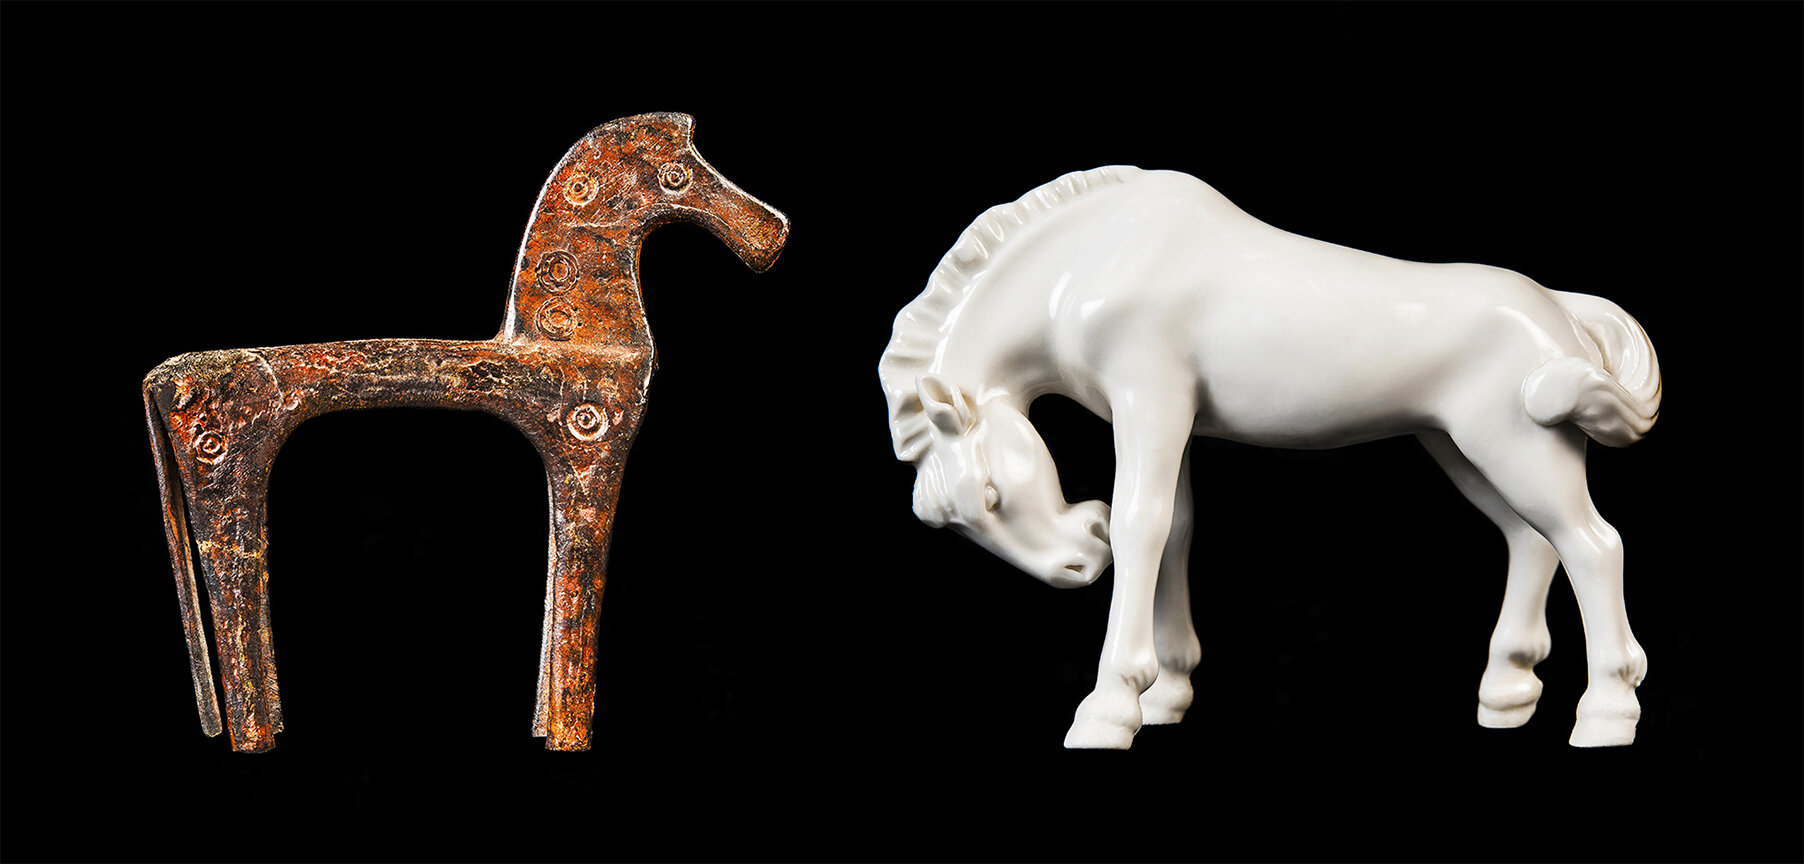    Duologue    Equus caballus: A Tale of Solid-Hoofed Herbivorous Quadrupeds  2019 (Found objects: a metal horse &amp; a ceramic horse)  image size: 45cm x  94cm  Archival pigment print on 310gsm cotton rag paper    